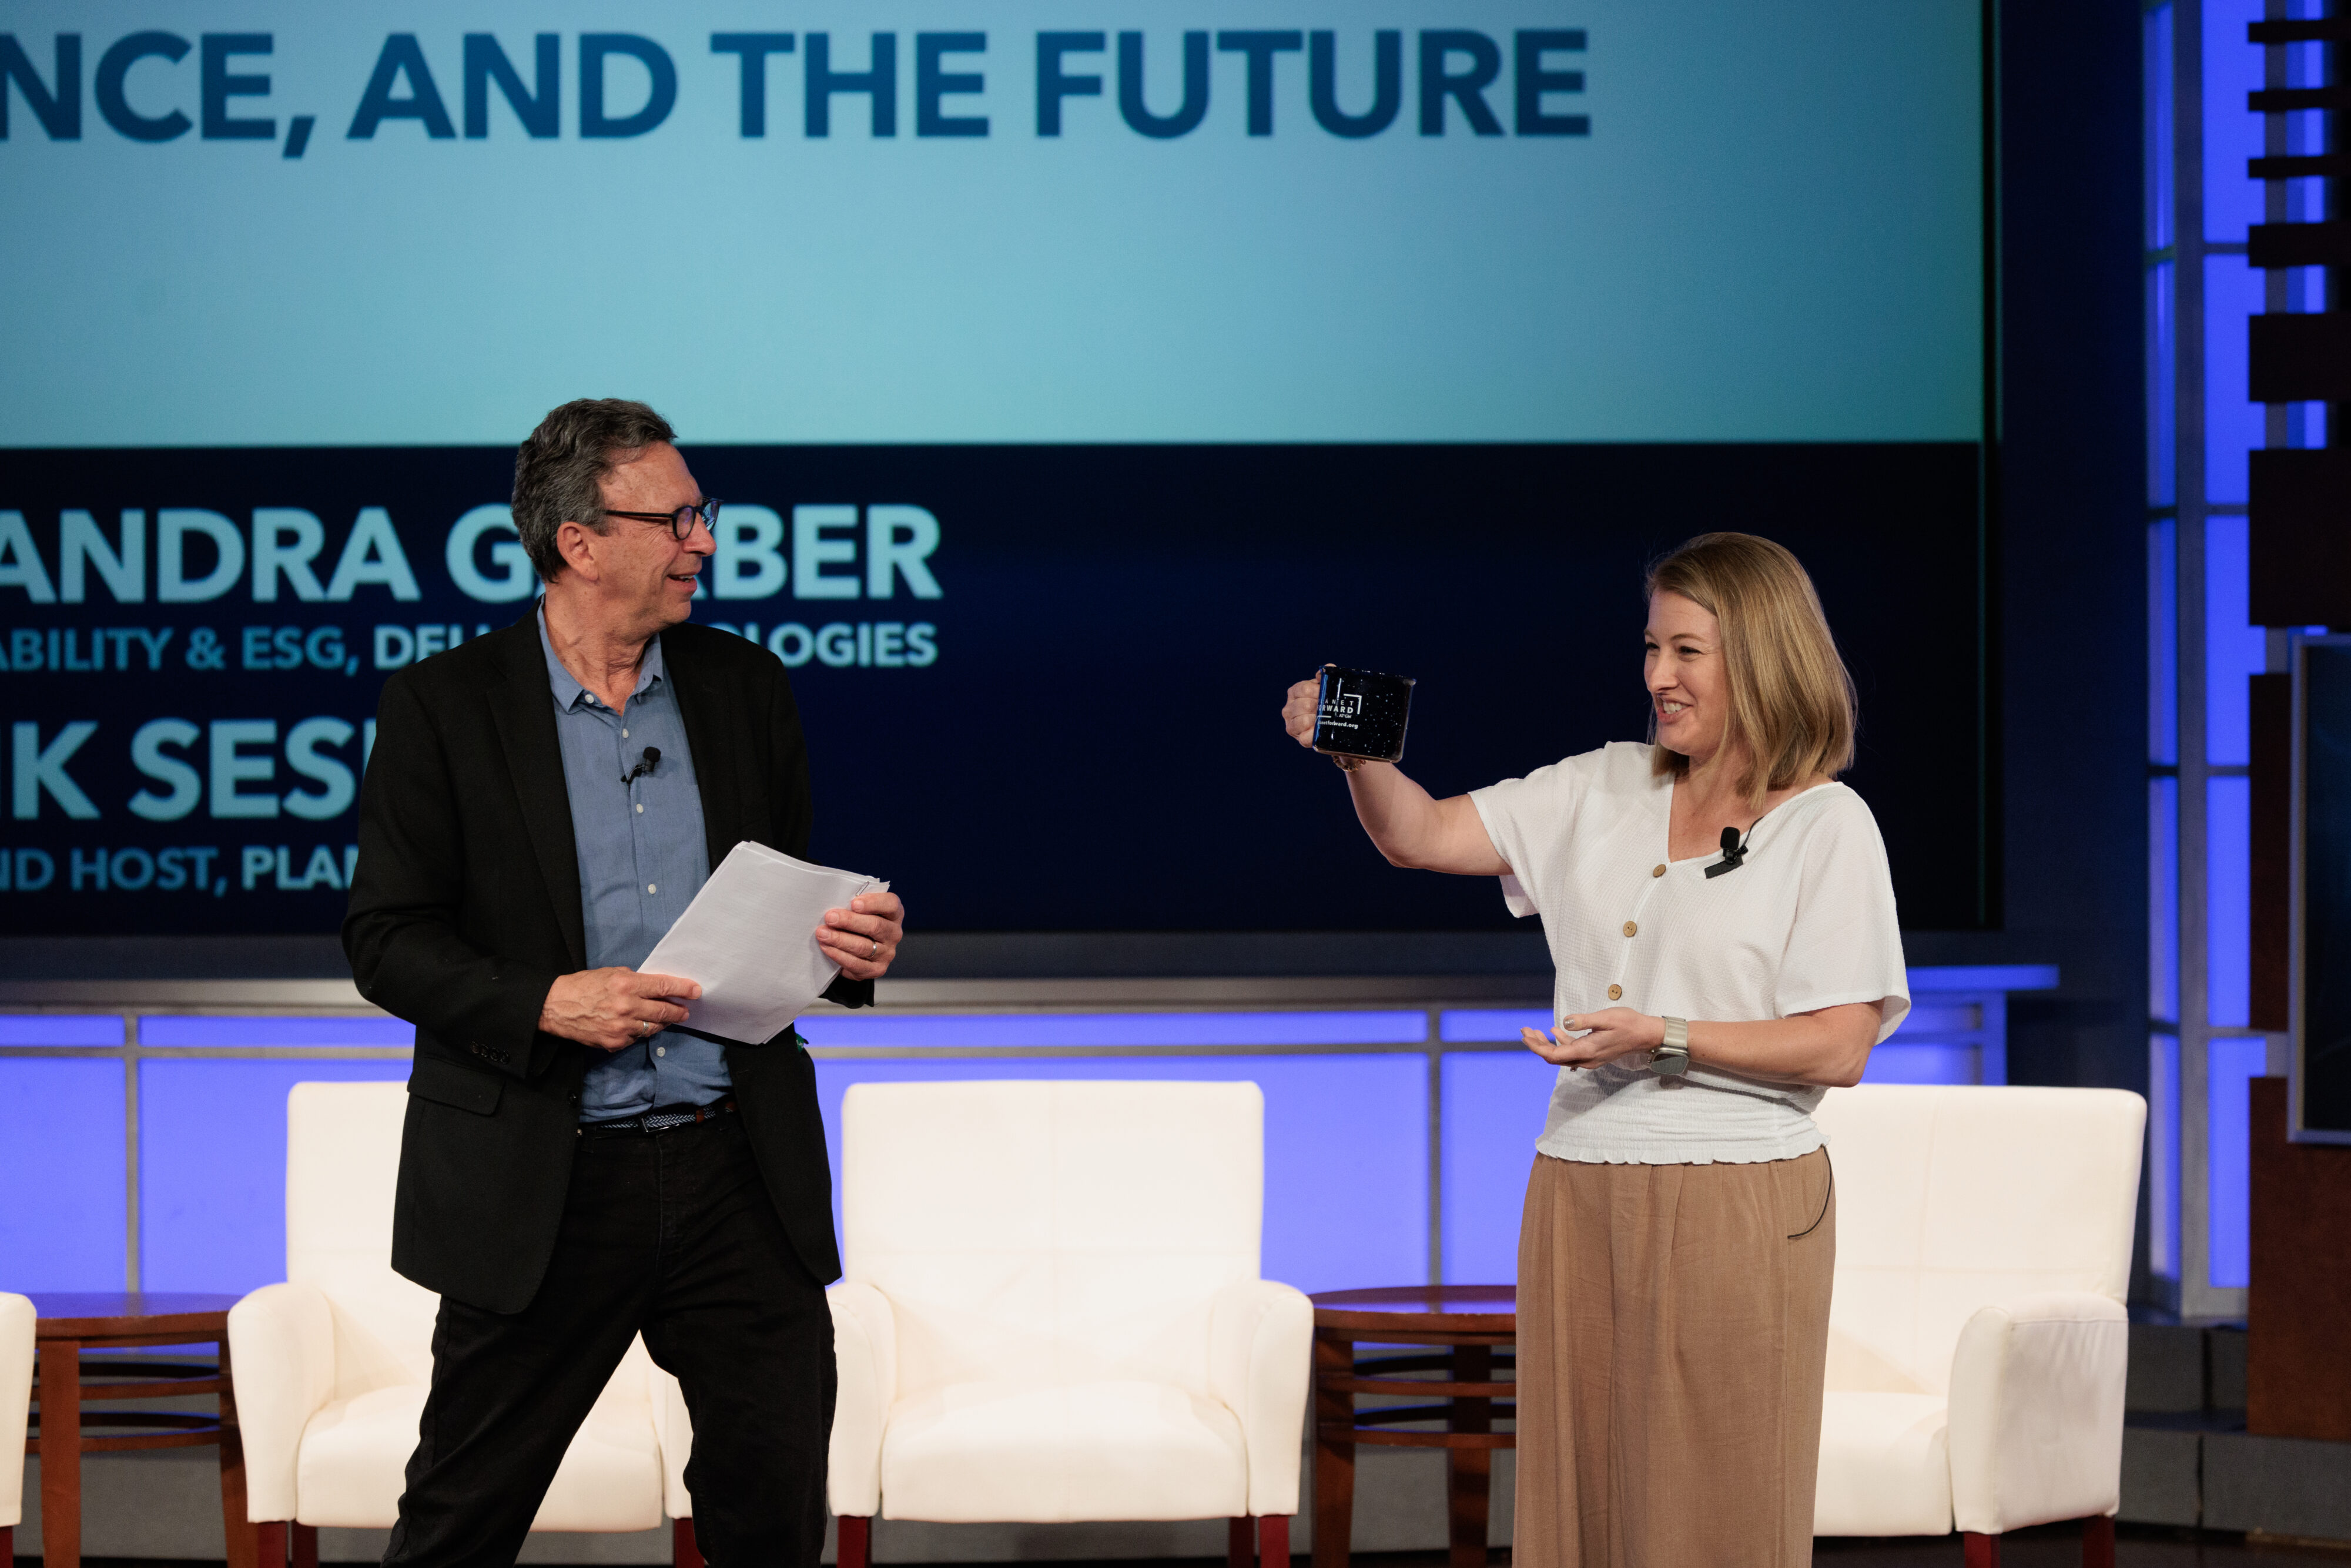 Frank Sesno and Cassandra Garber, VP, Corporate Sustainability & ESG, Dell Technologies; admire a Planet Forward Mug on stage and discuss the role of complexity and science in solving the world's most pressing problems. 